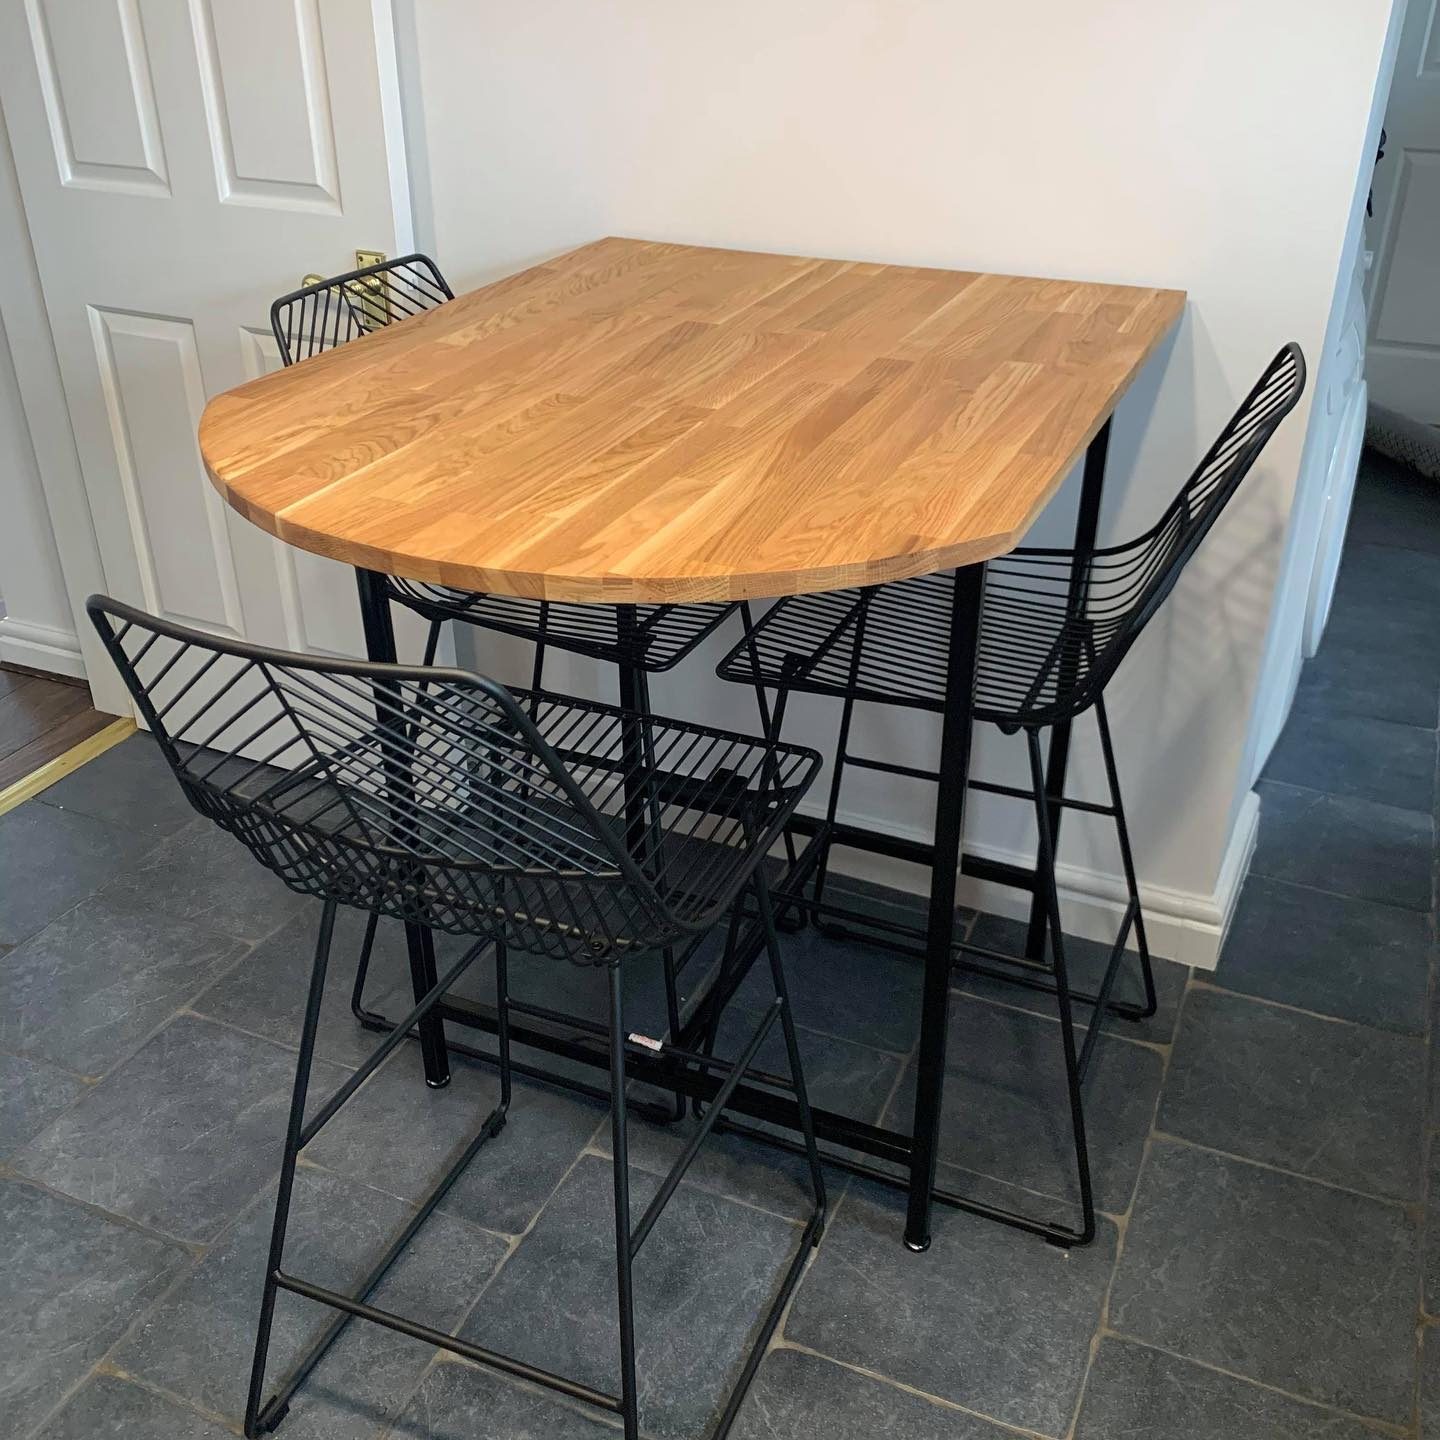 Made to fit metal and wood kitchen table & chairs